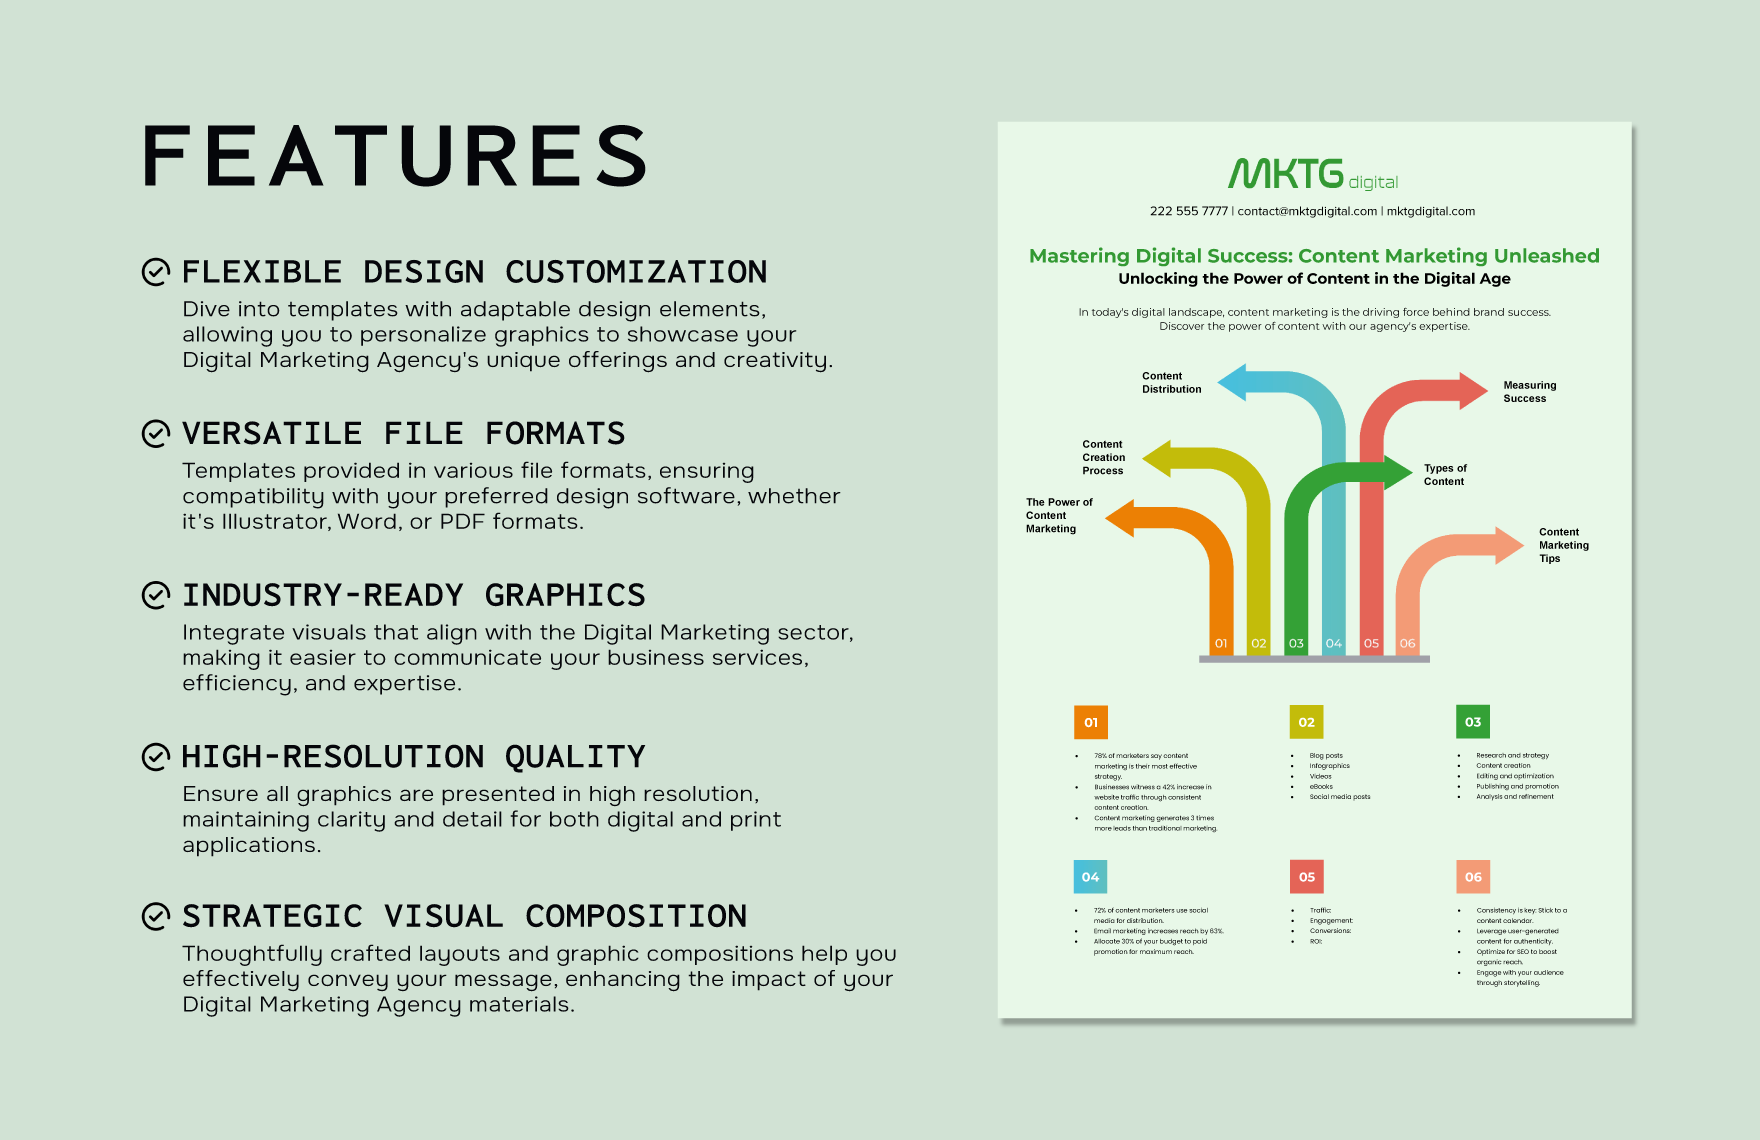 Digital Marketing Agency Content Marketing Infographic Template